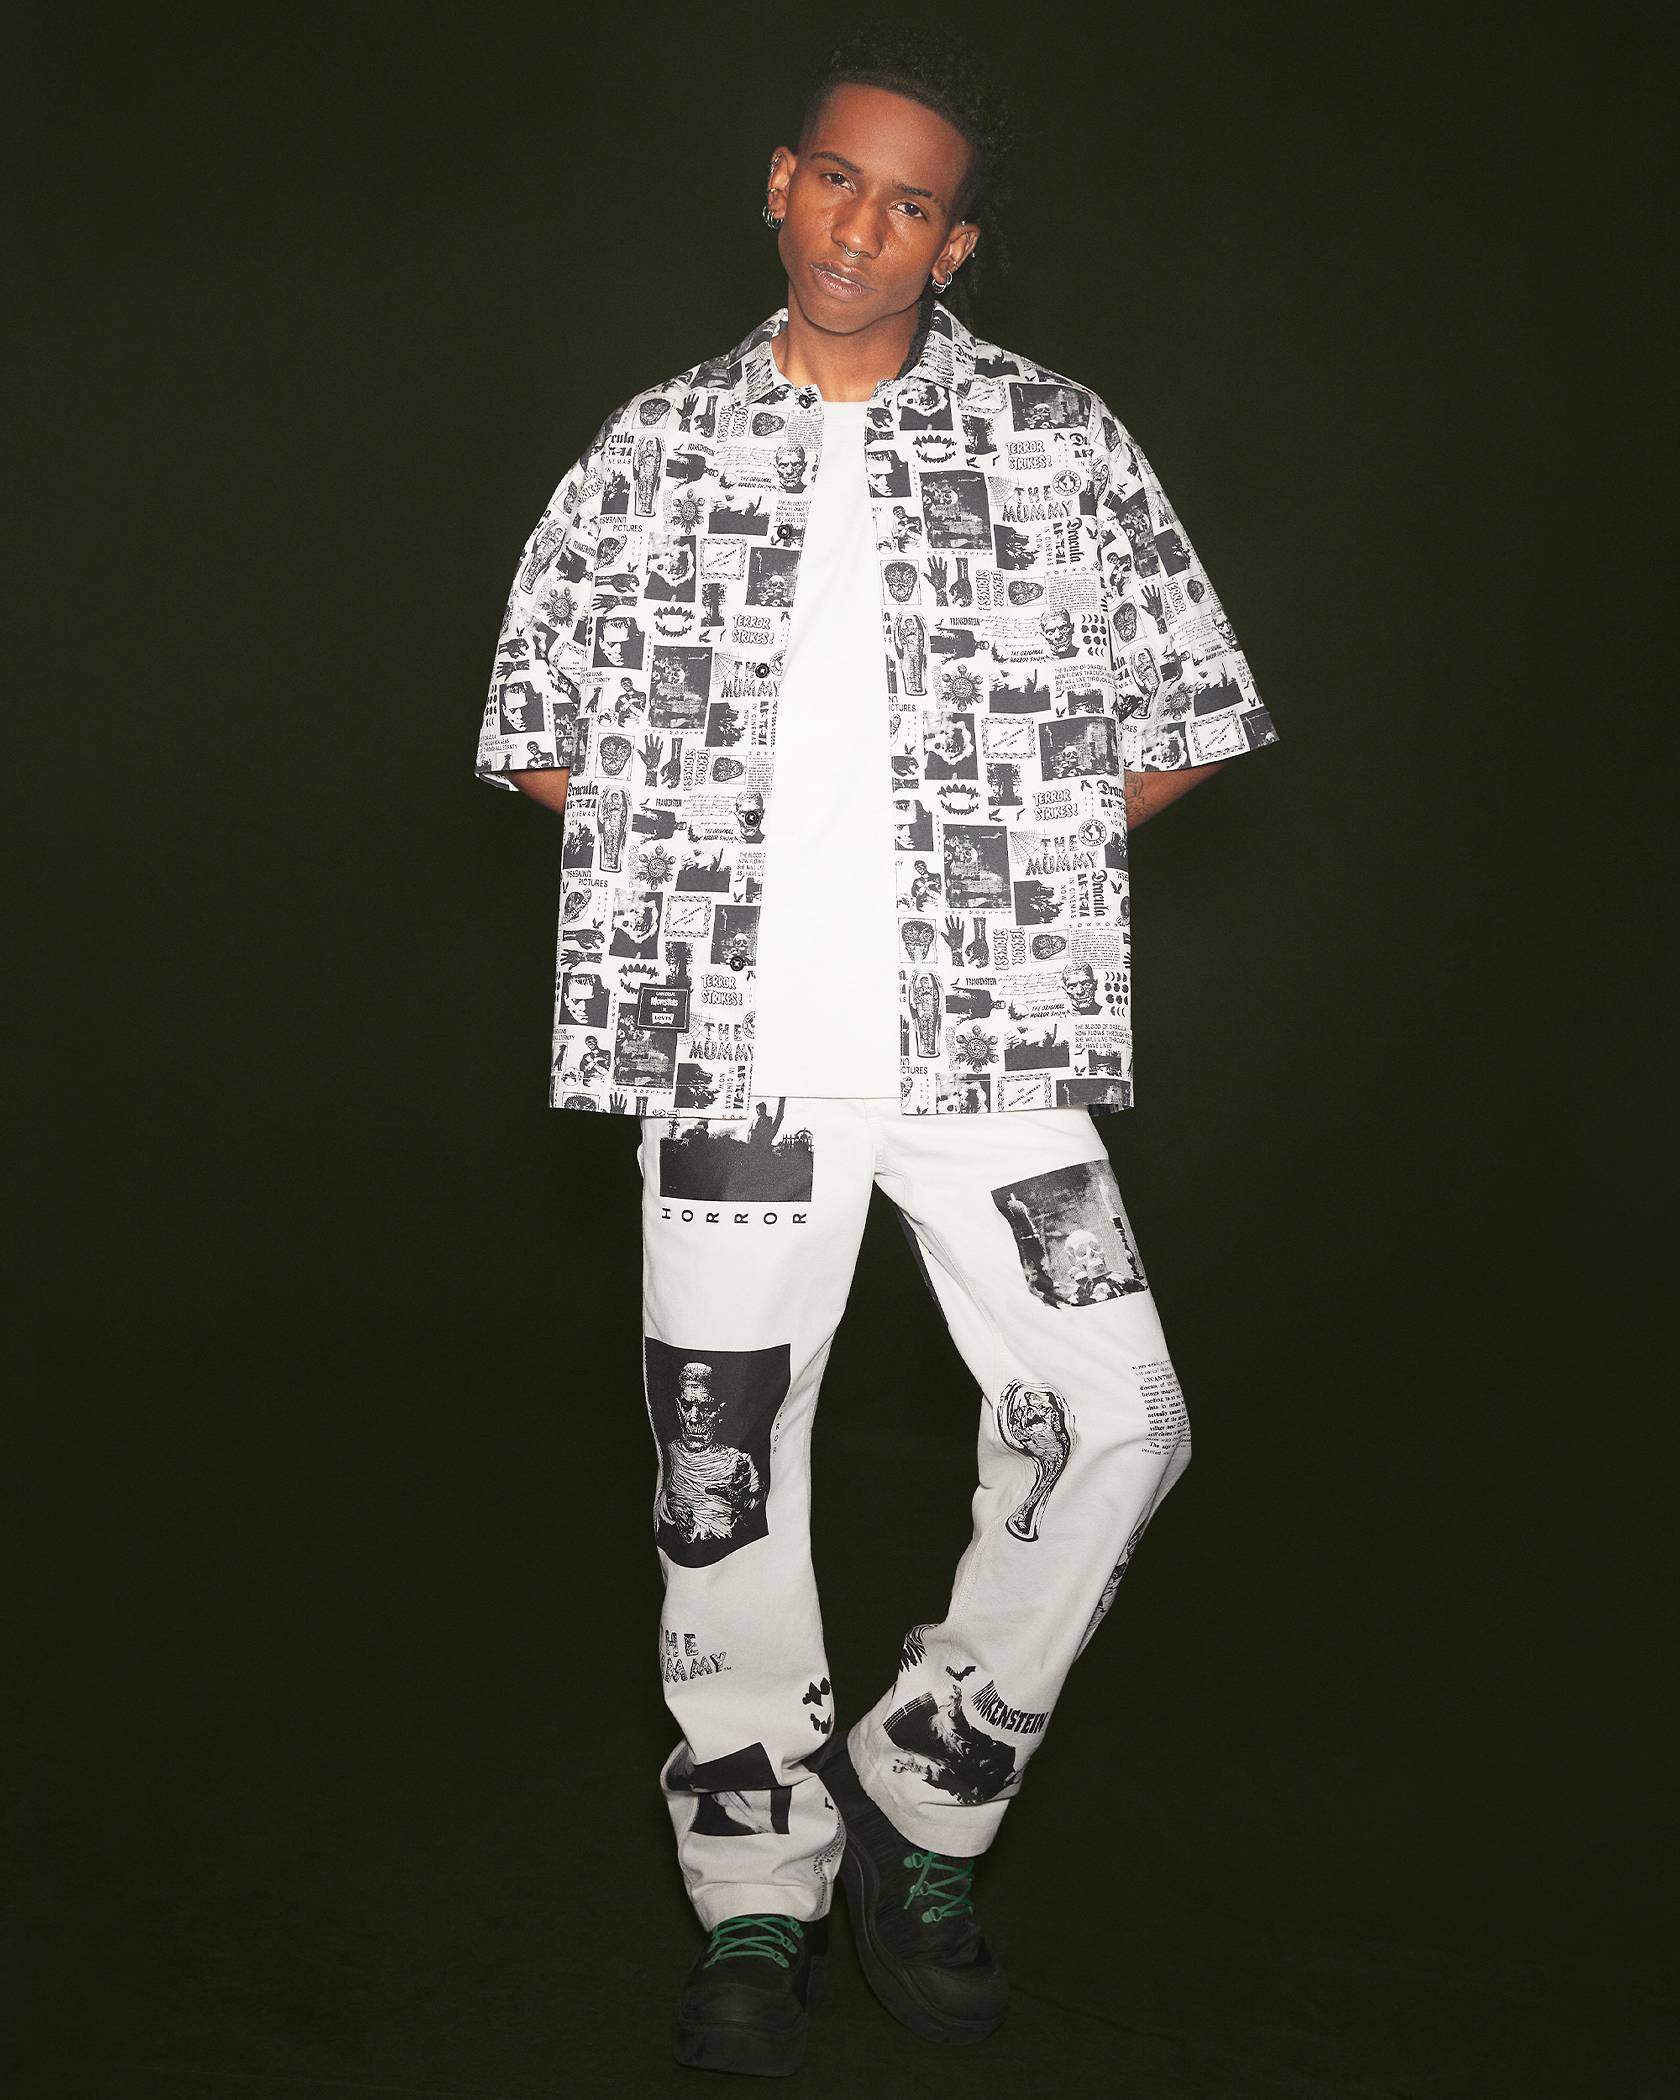 Image of man wearing clothing with graphic spooky prints against black background